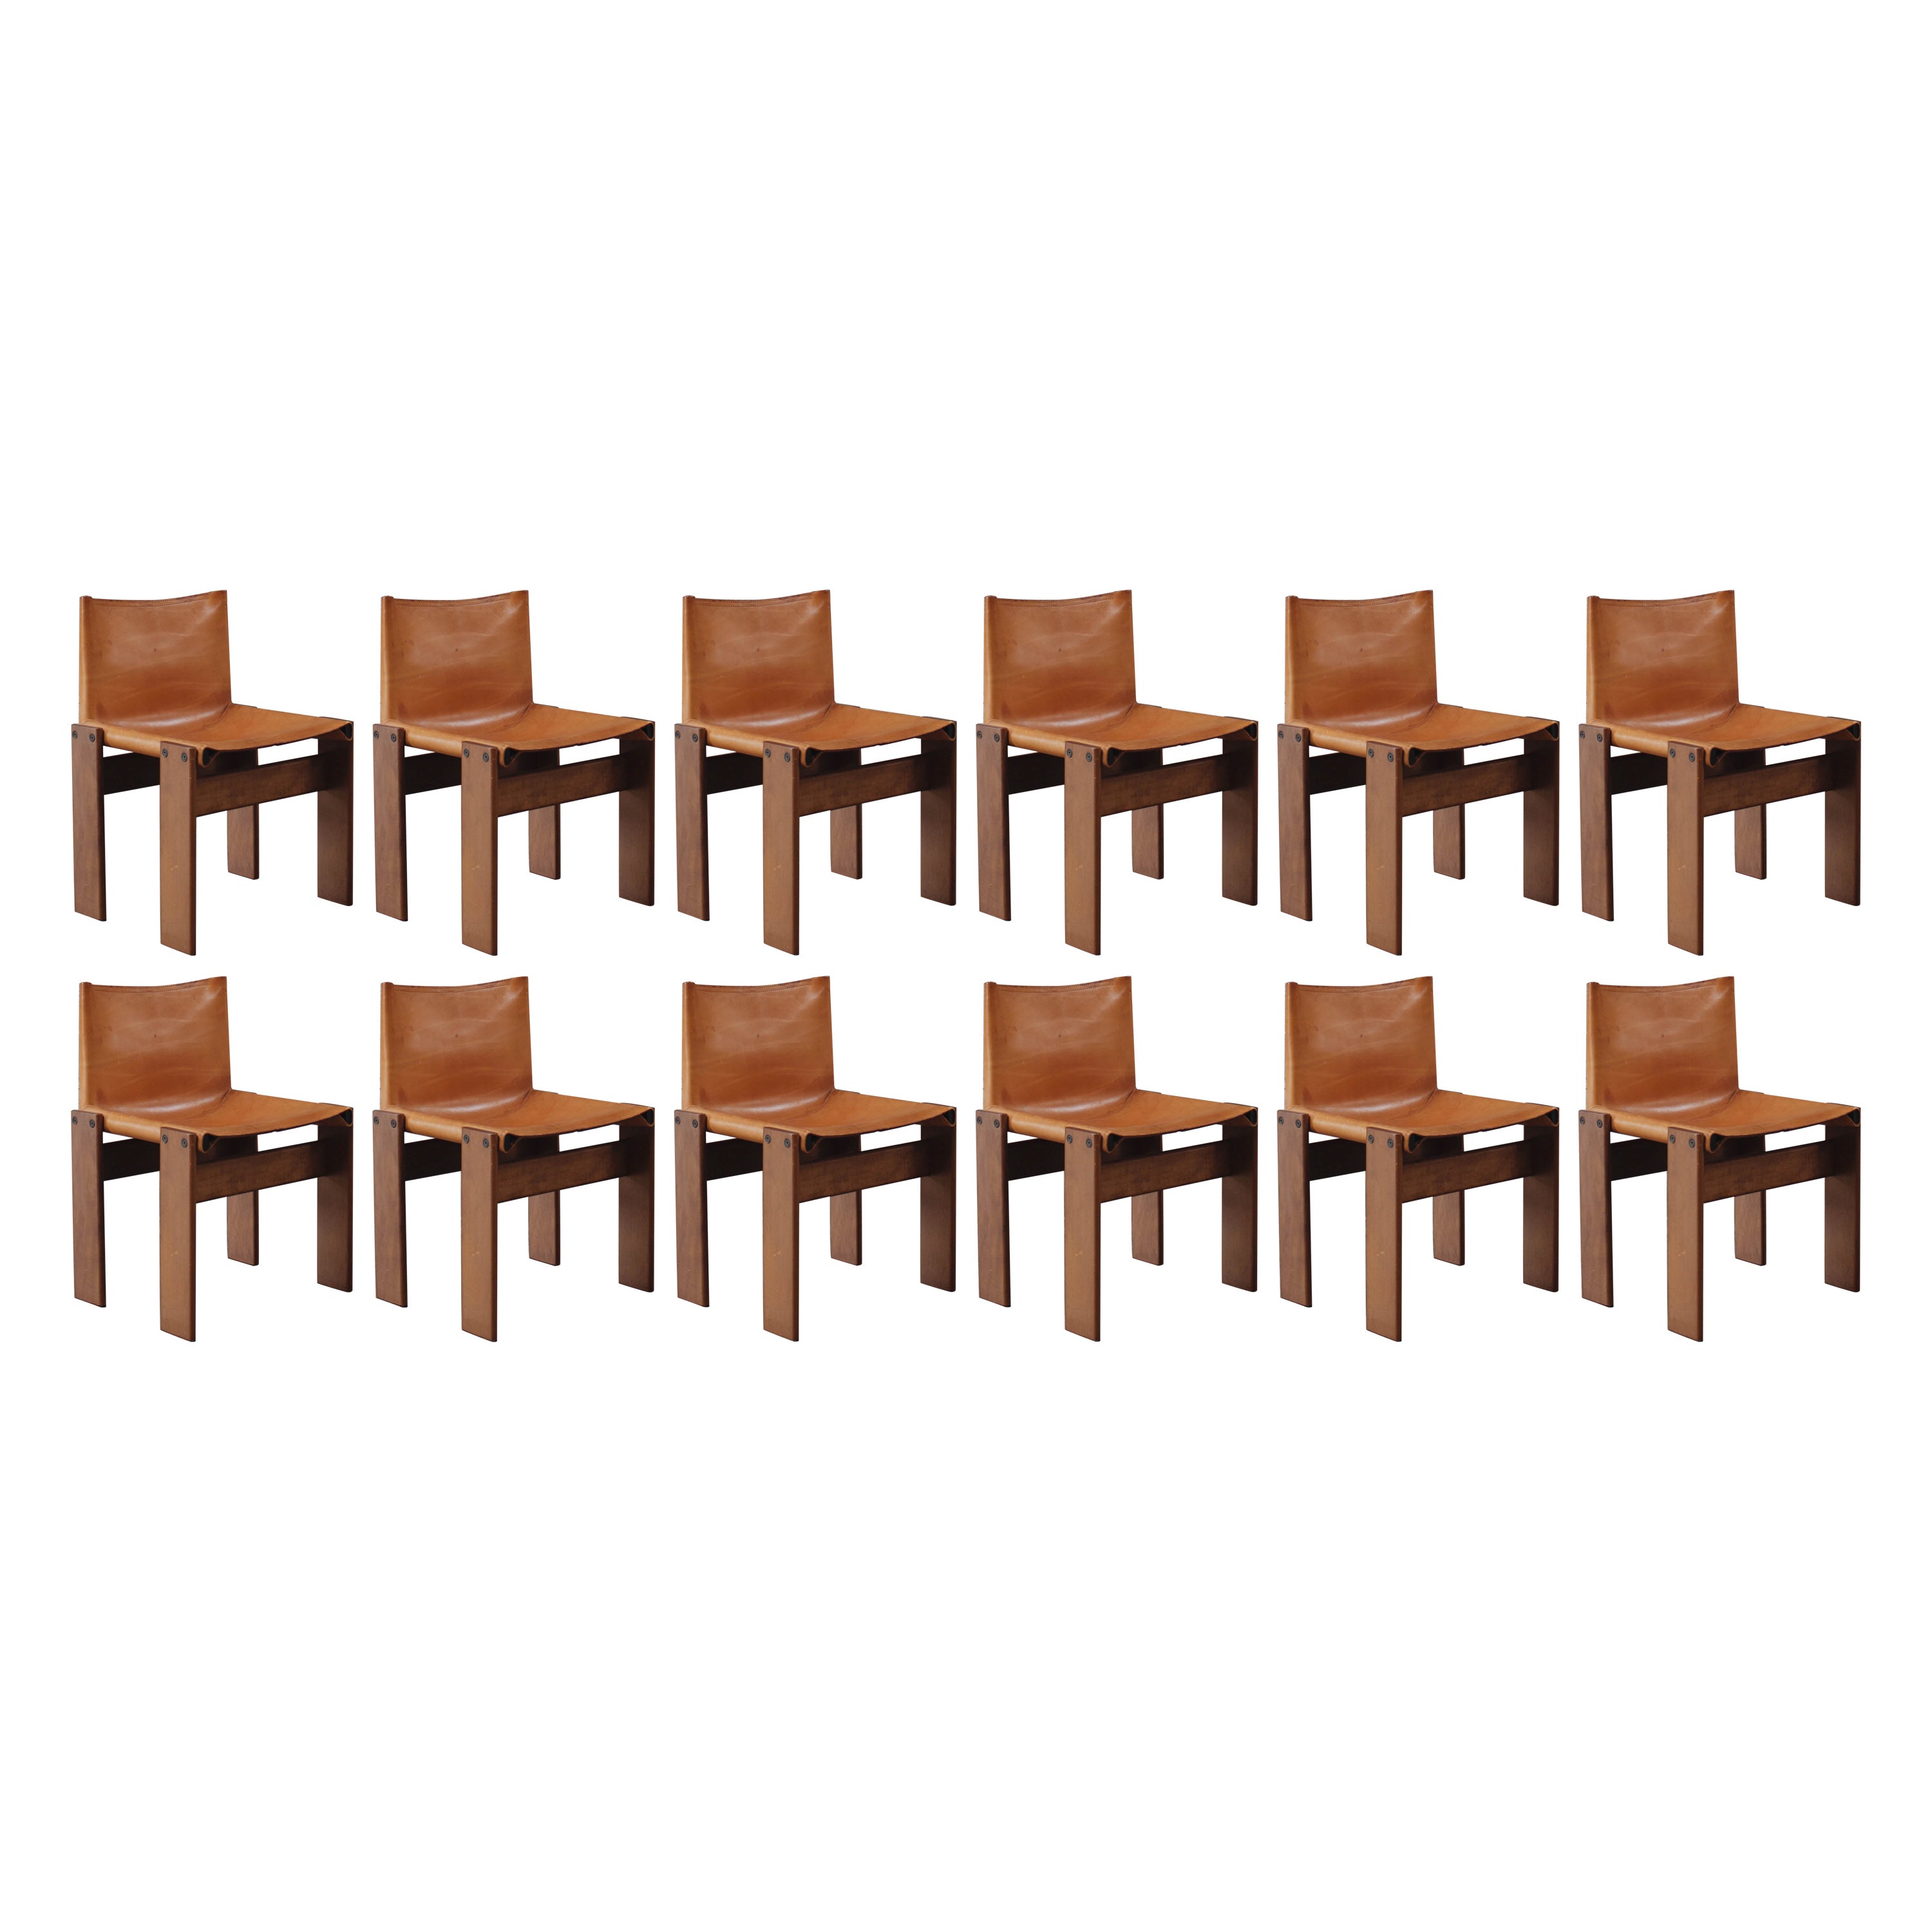 Afra & Tobia Scarpa "Monk" Dining Chairs for Molteni, 1974, Set of 12 For Sale